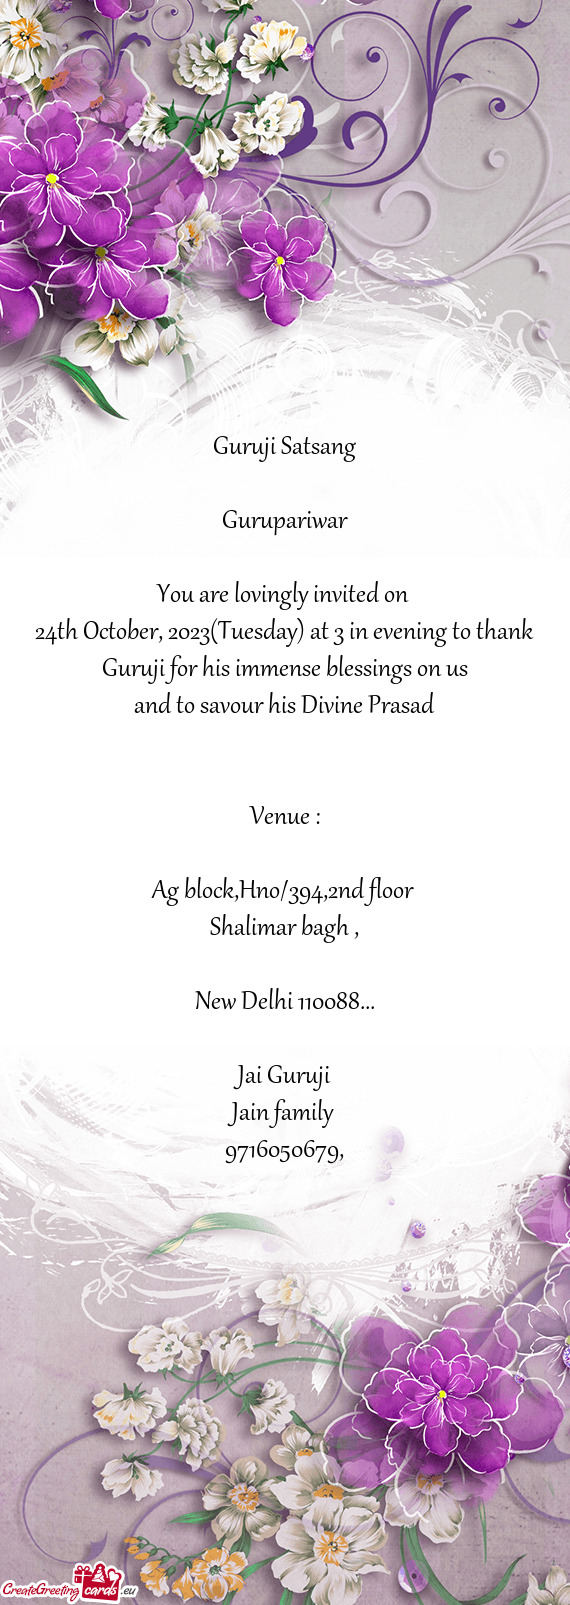 24th October, 2023(Tuesday) at 3 in evening to thank Guruji for his immense blessings on us